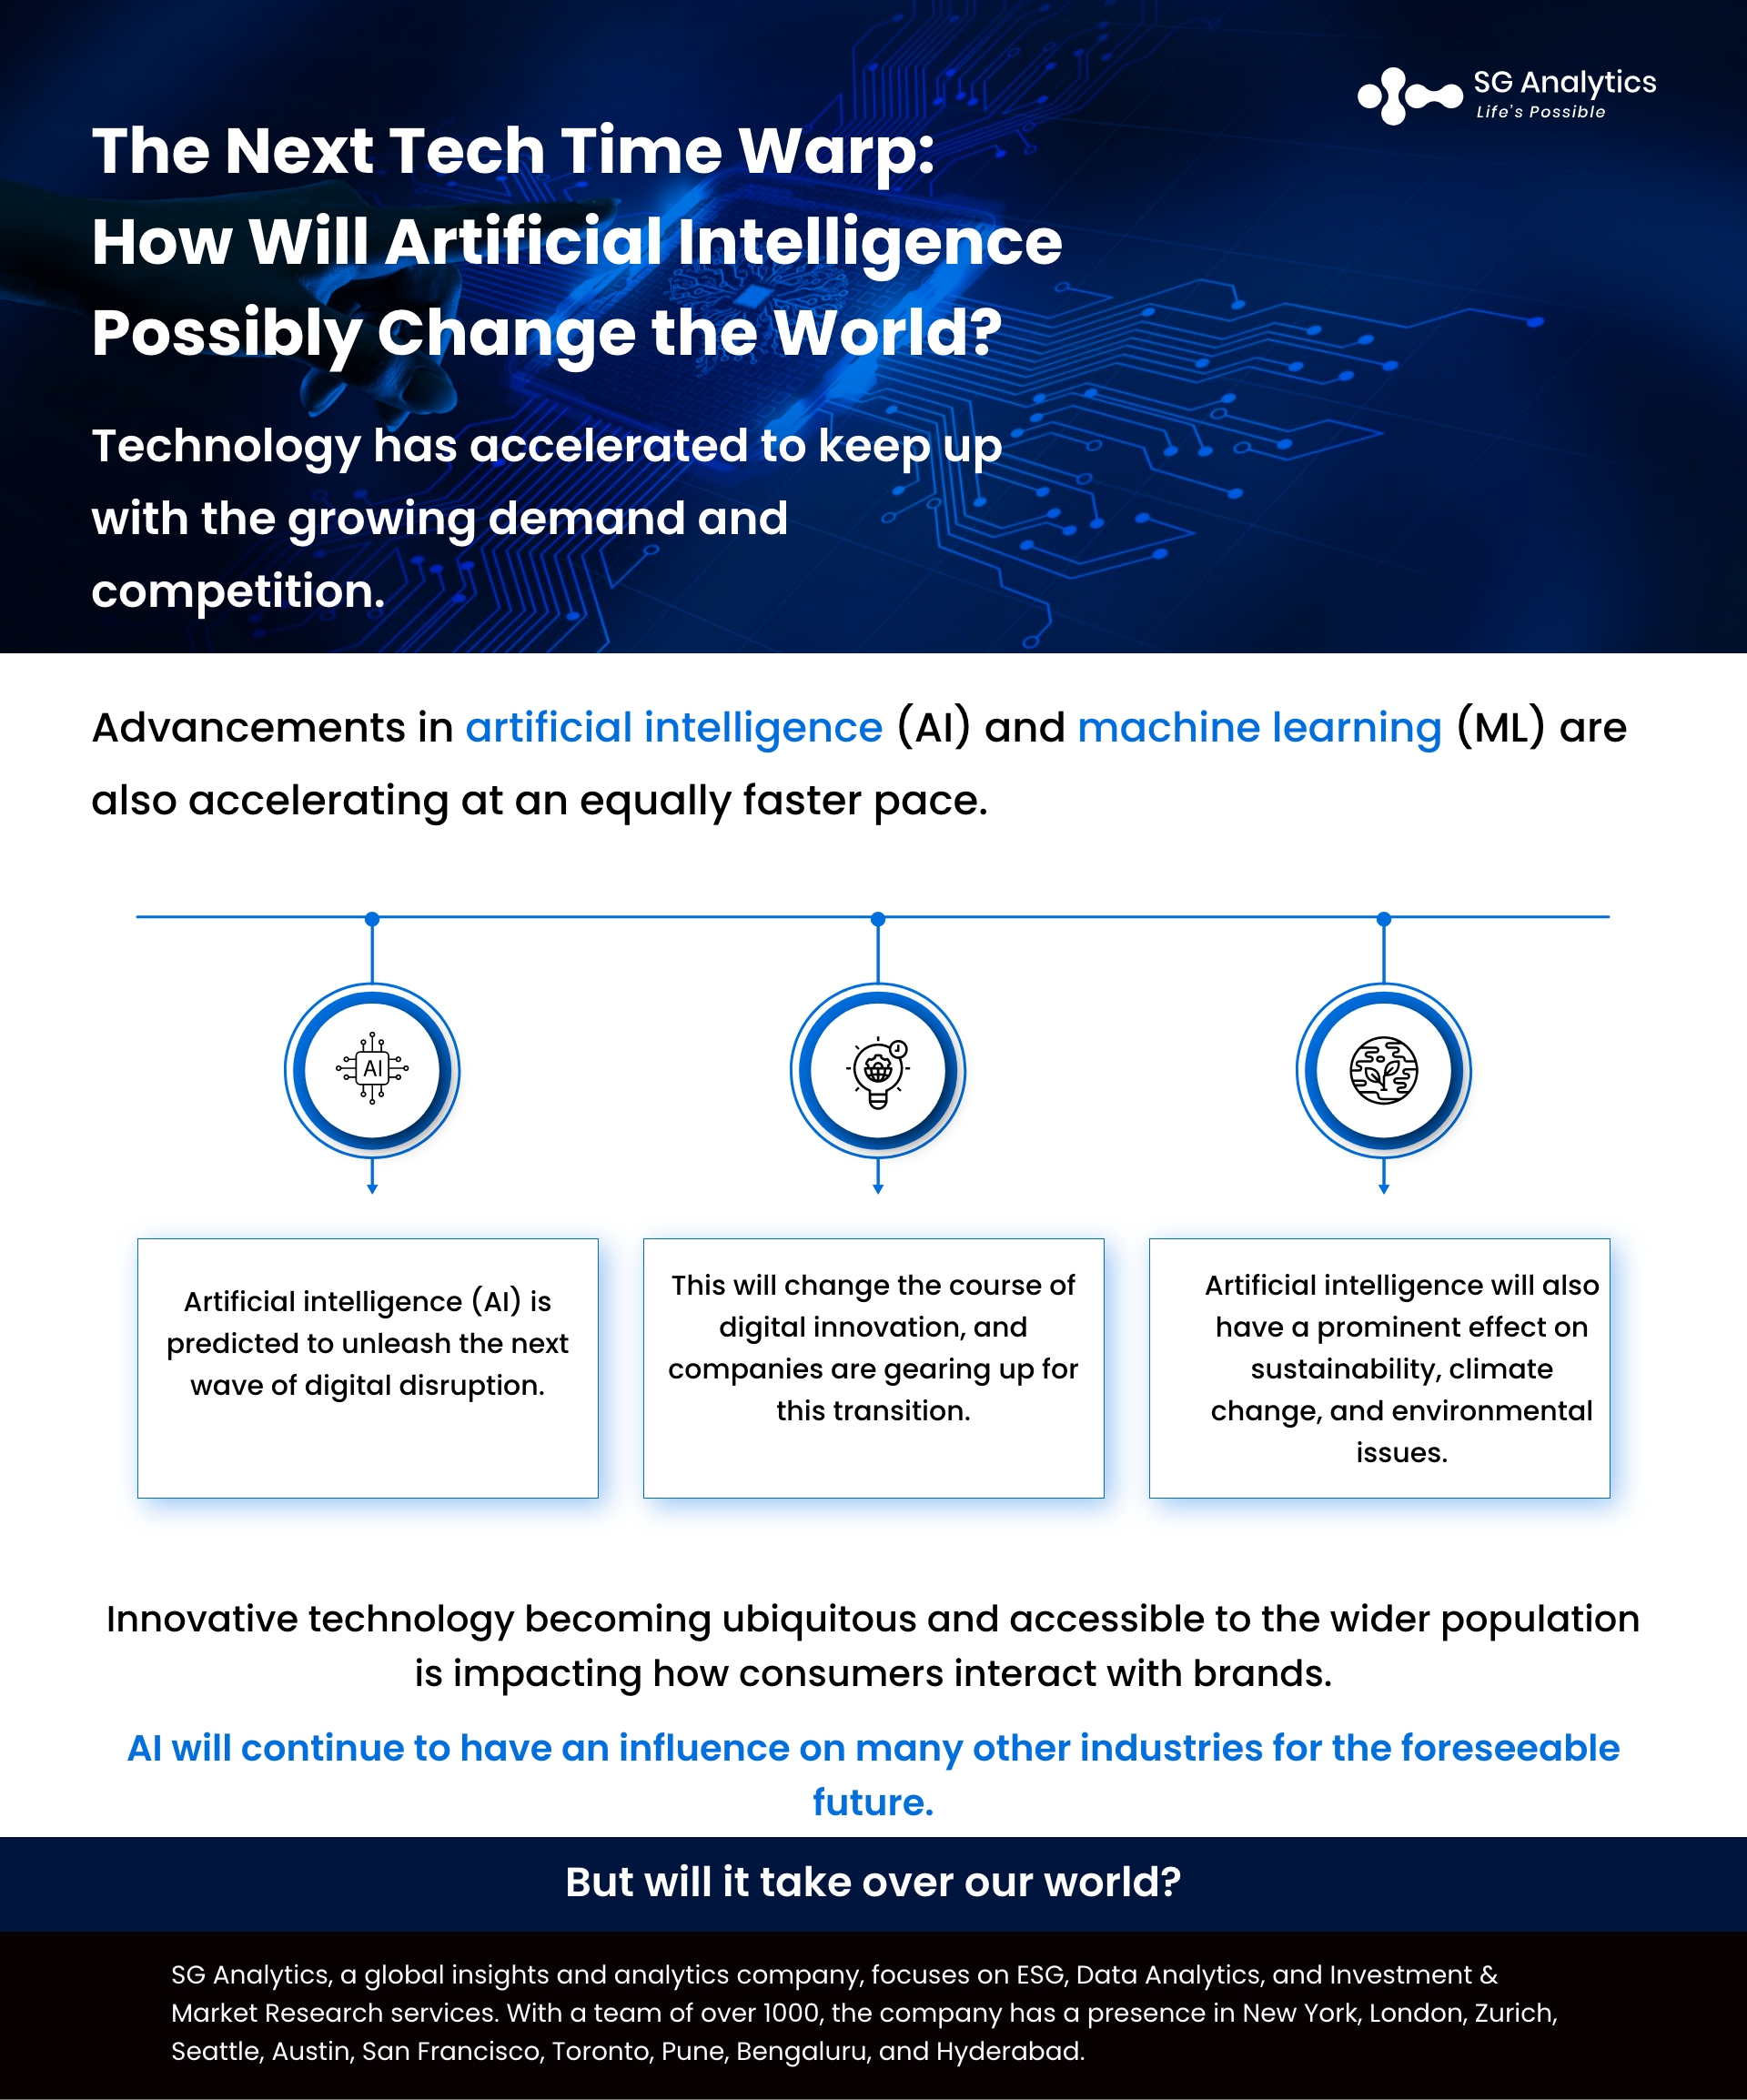 SGAnalytics_Infographic_The Next Tech Time Warp: How Will Artificial Intelligence Possibly Change the World?